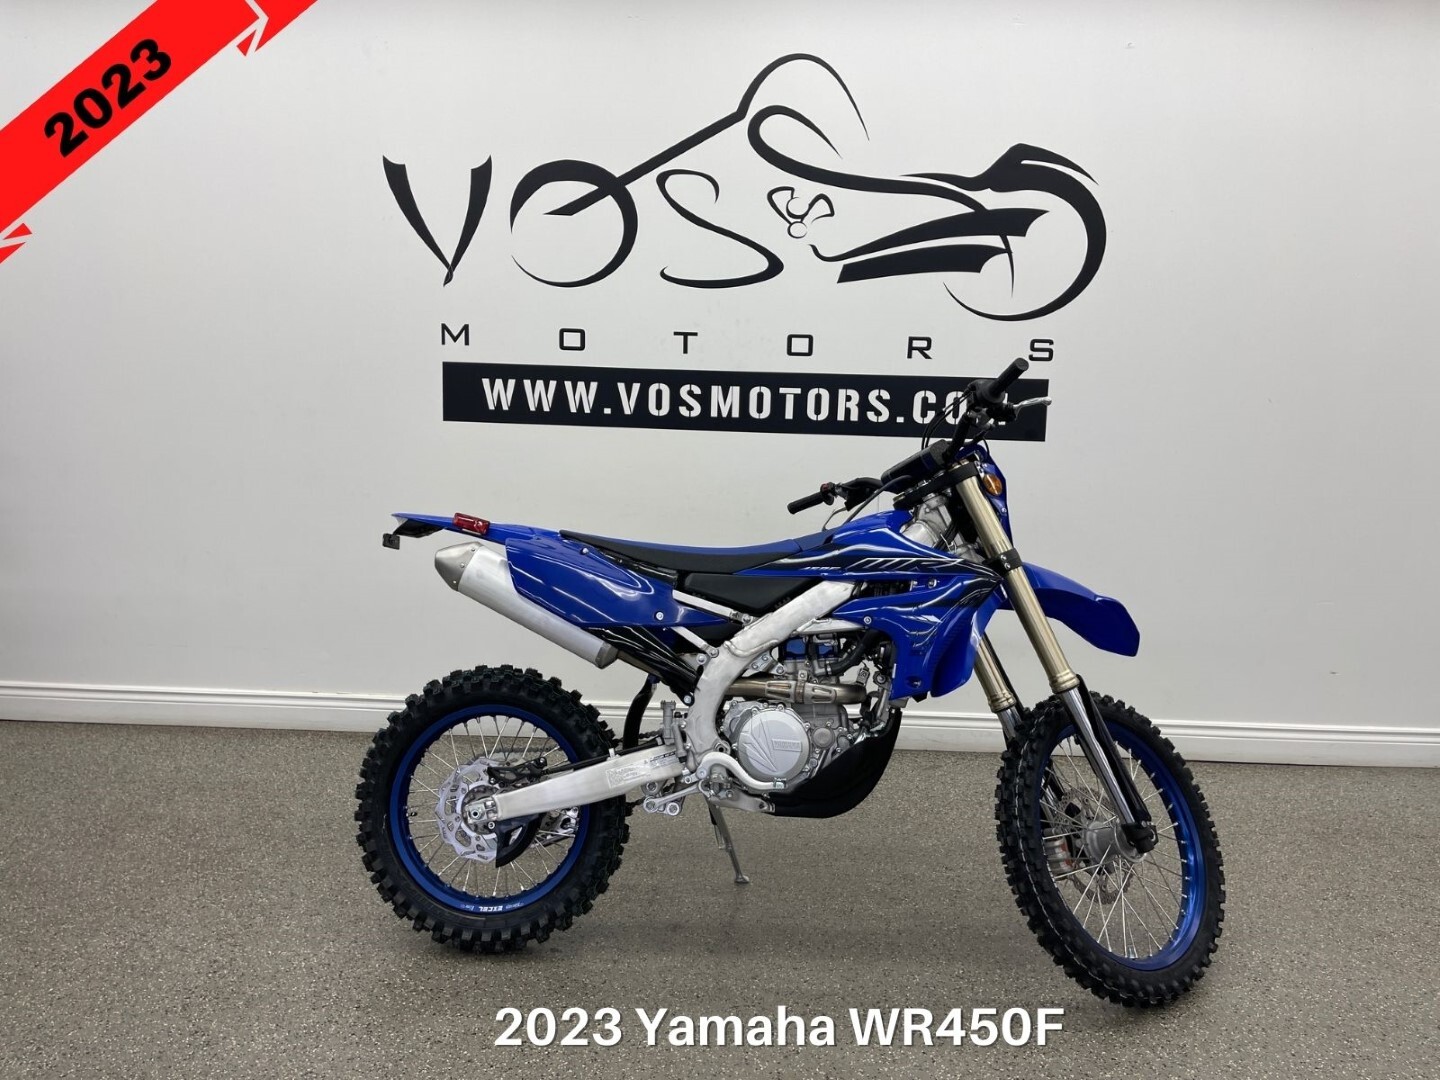 2023 Yamaha WR450FPL WR450F - V5349 - -No Payments for 1 Year**